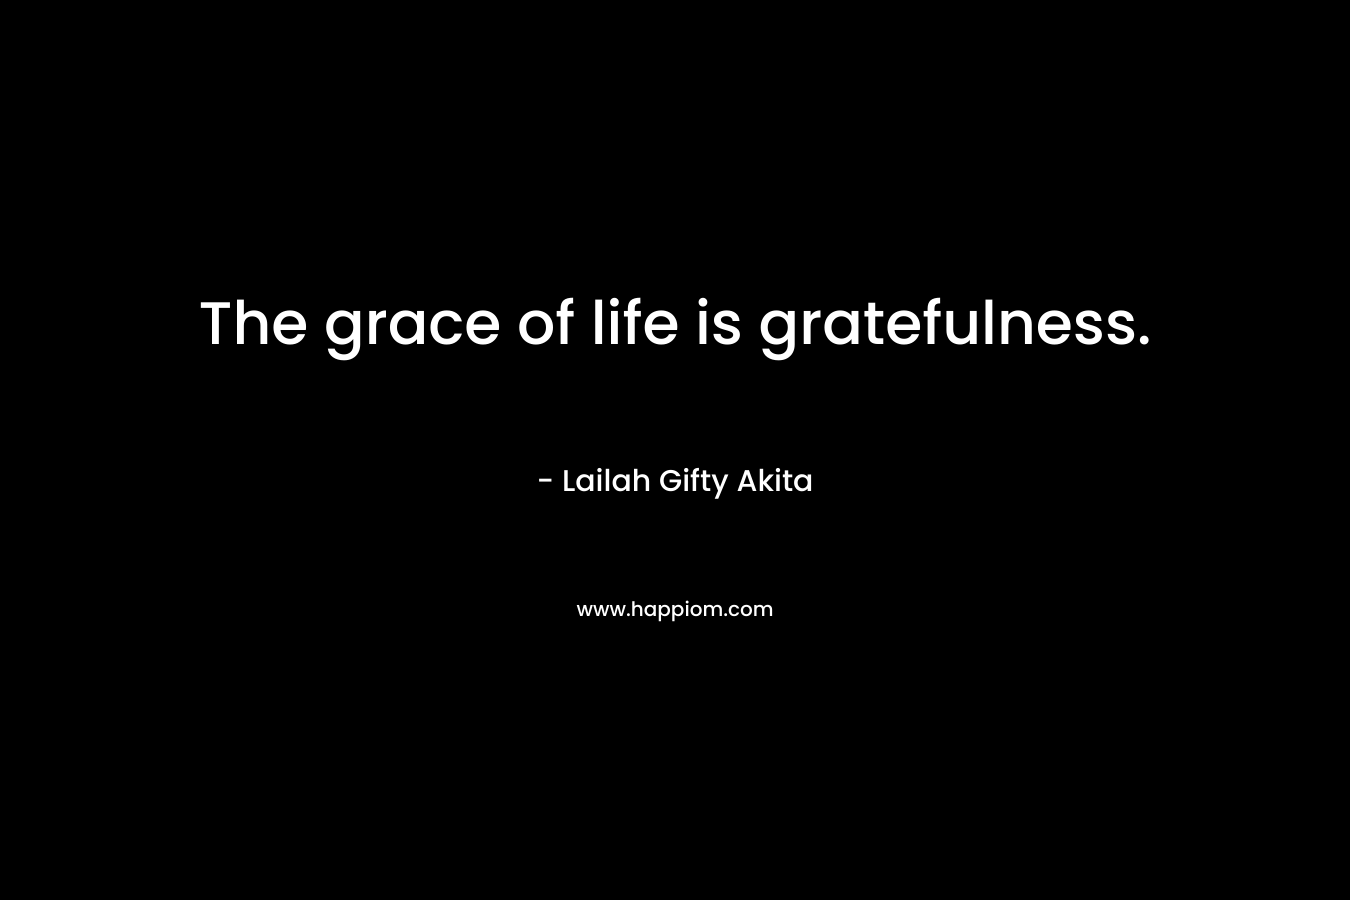 The grace of life is gratefulness.